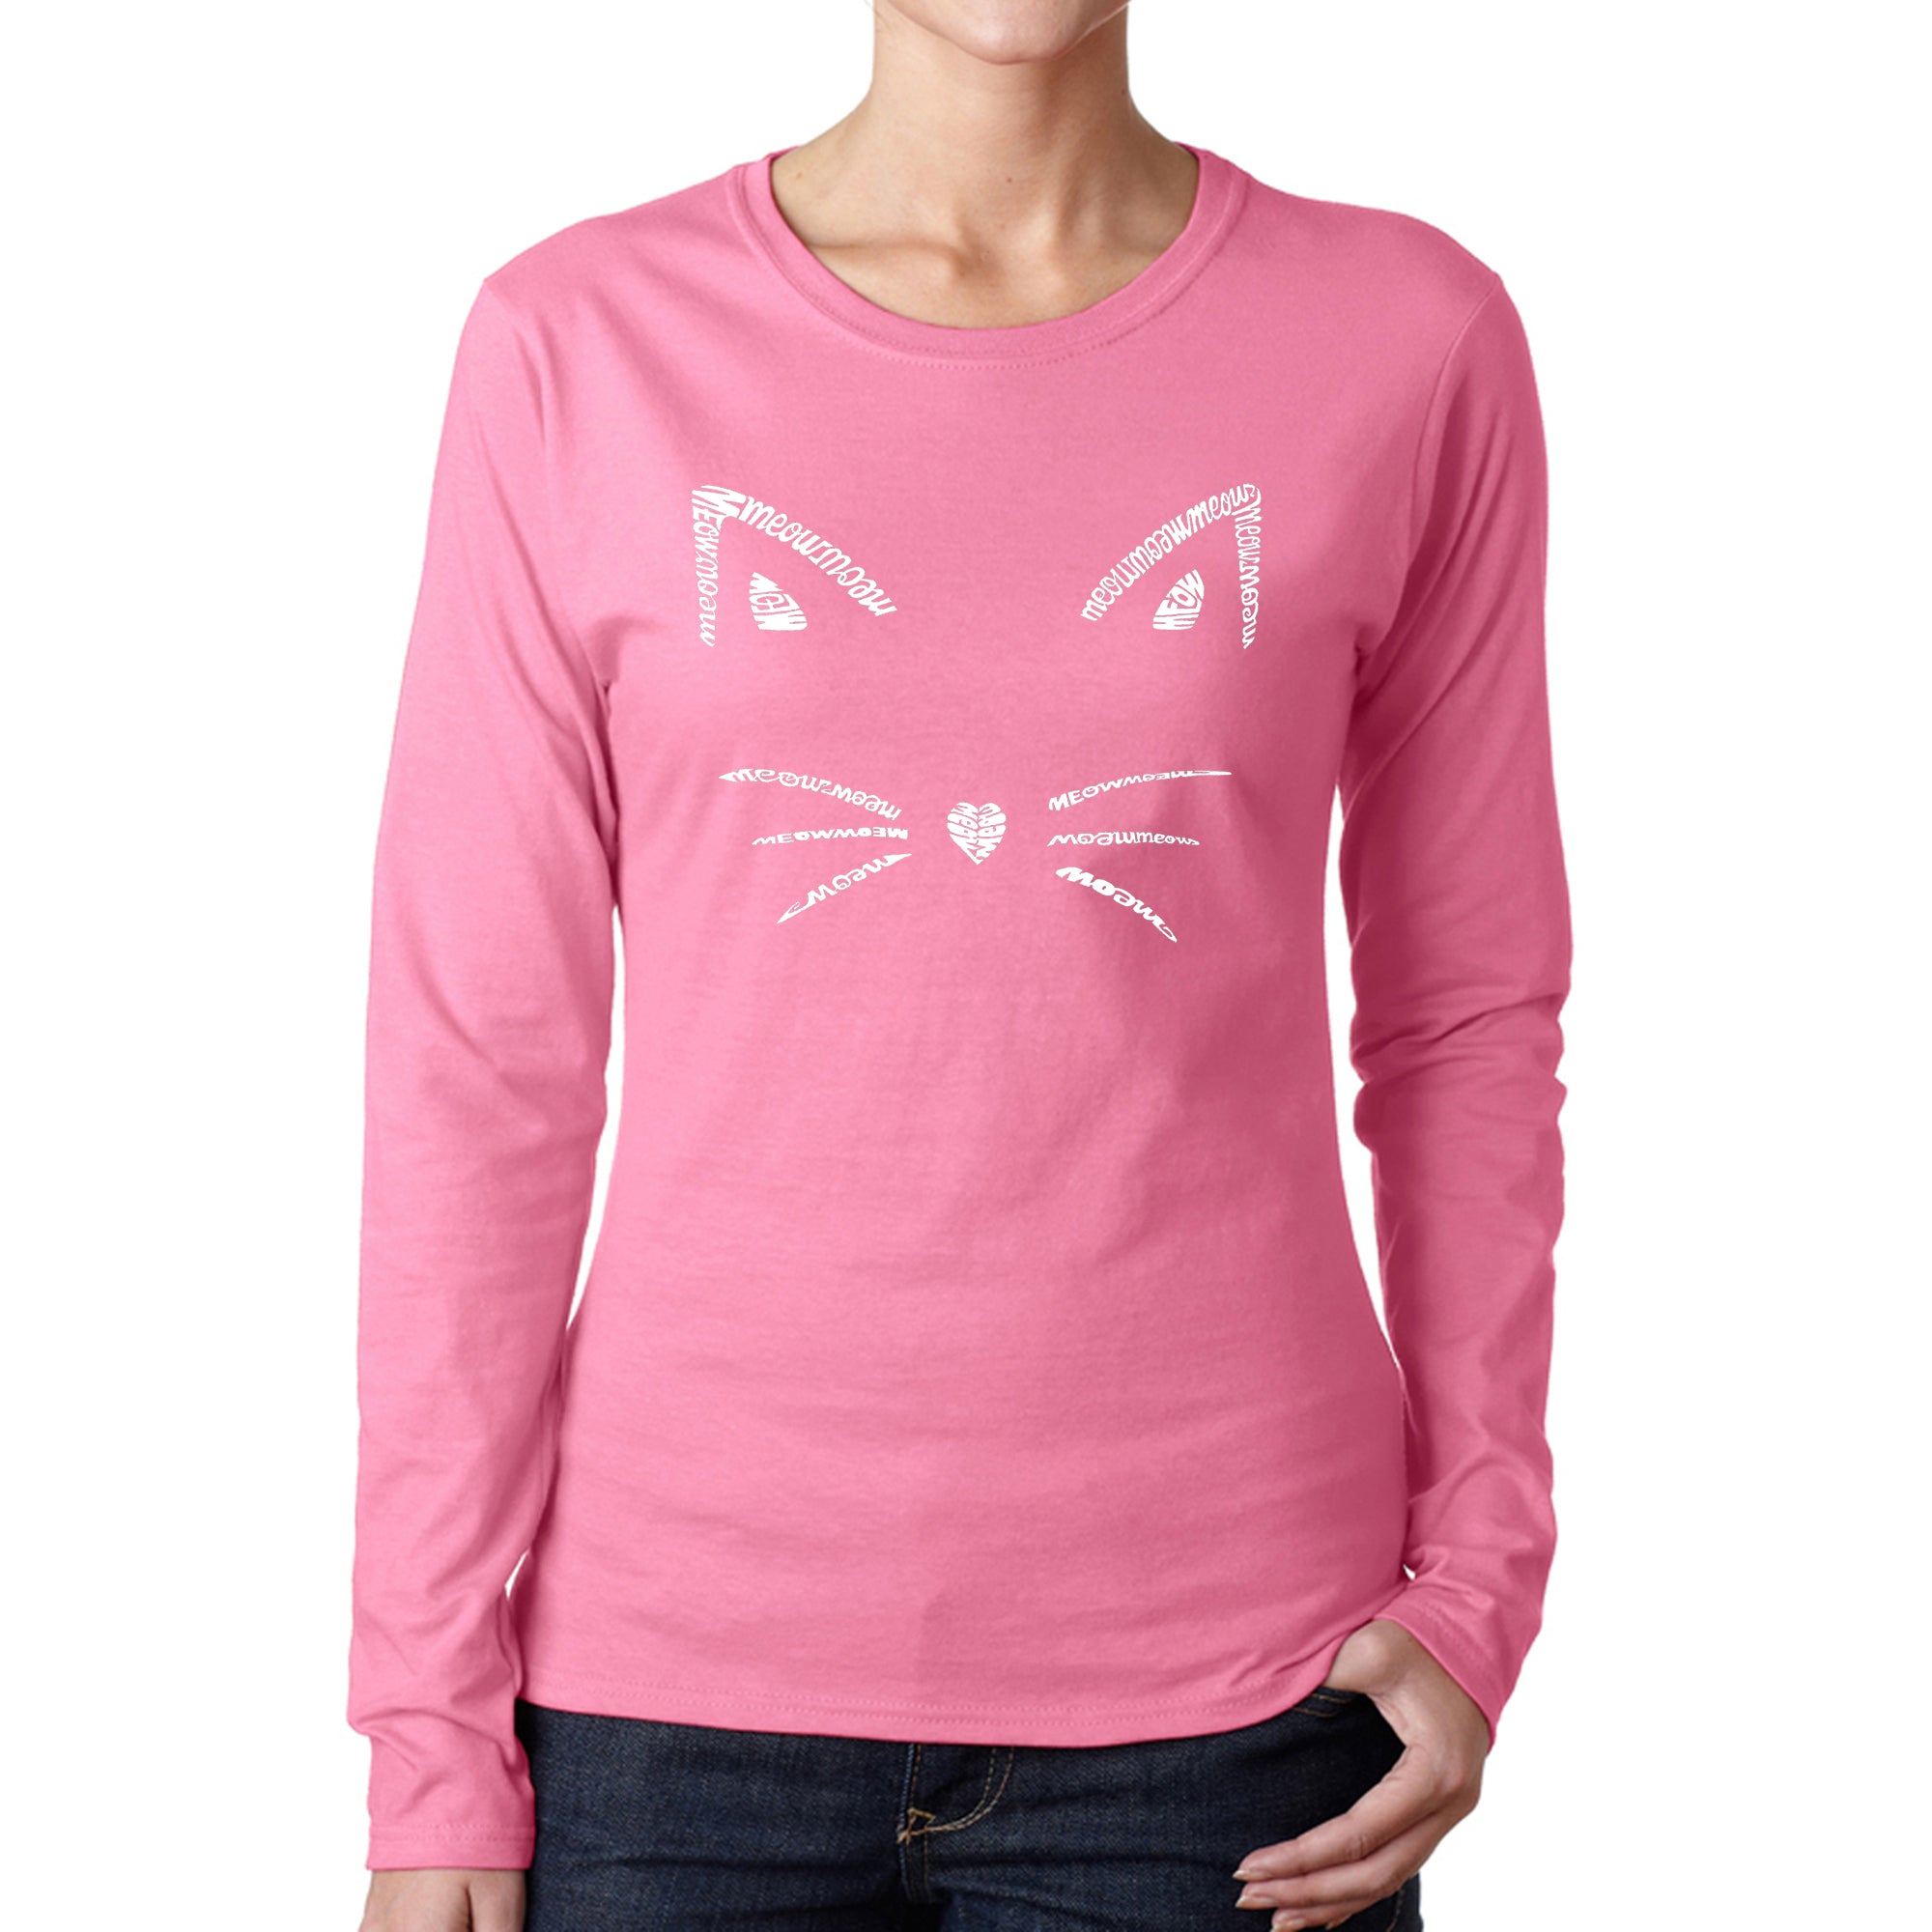 Whiskers - Women's Word Art Long Sleeve T-Shirt - Pink - XX-Large